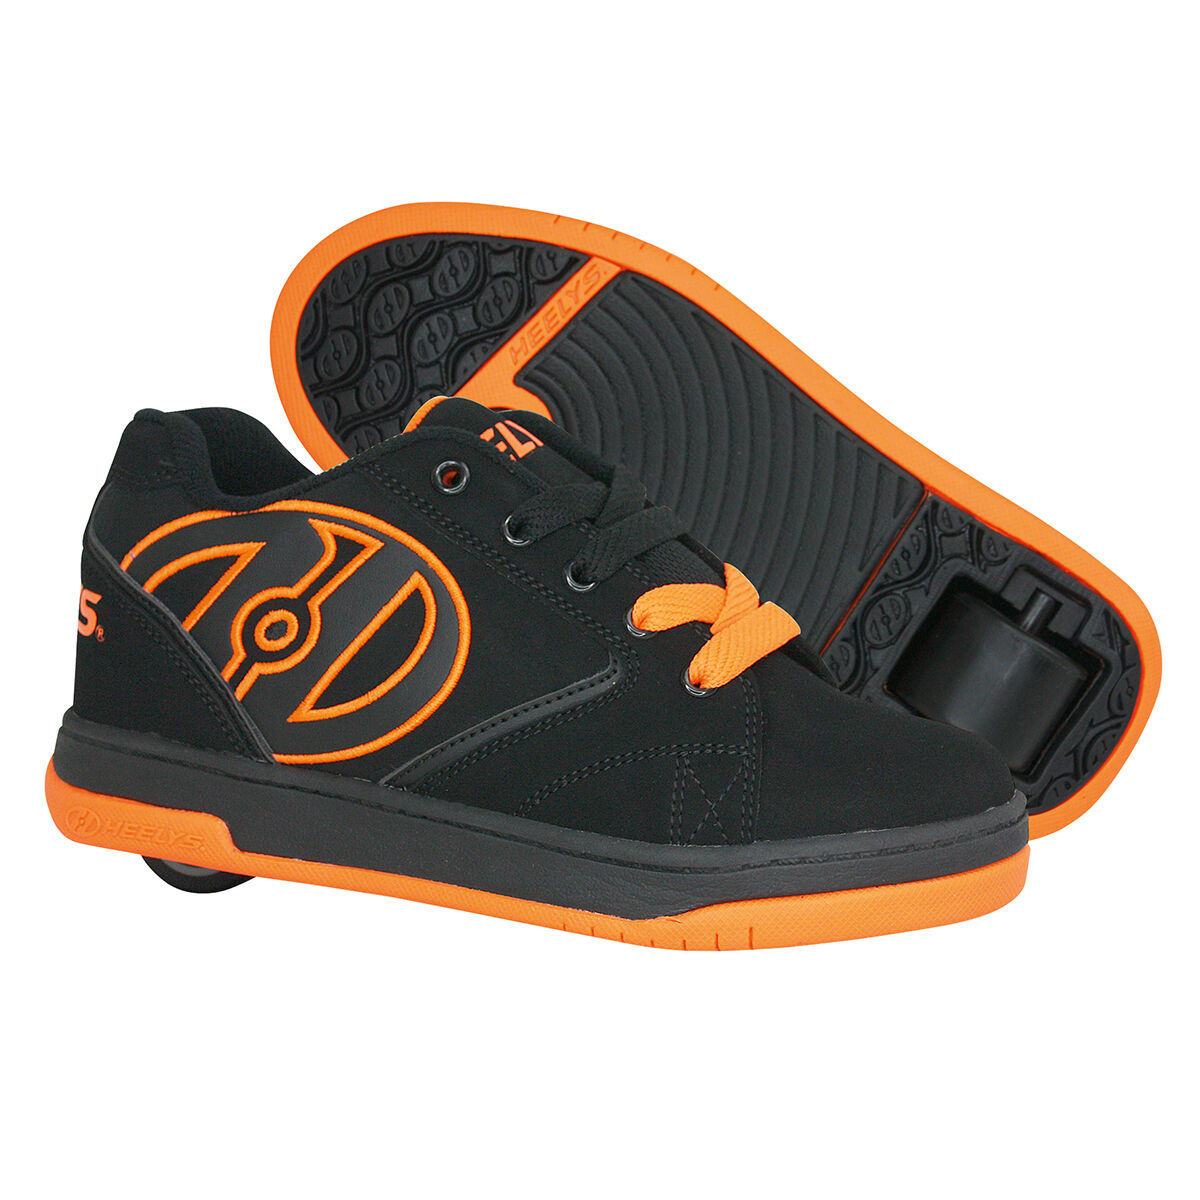 heelys for shoes